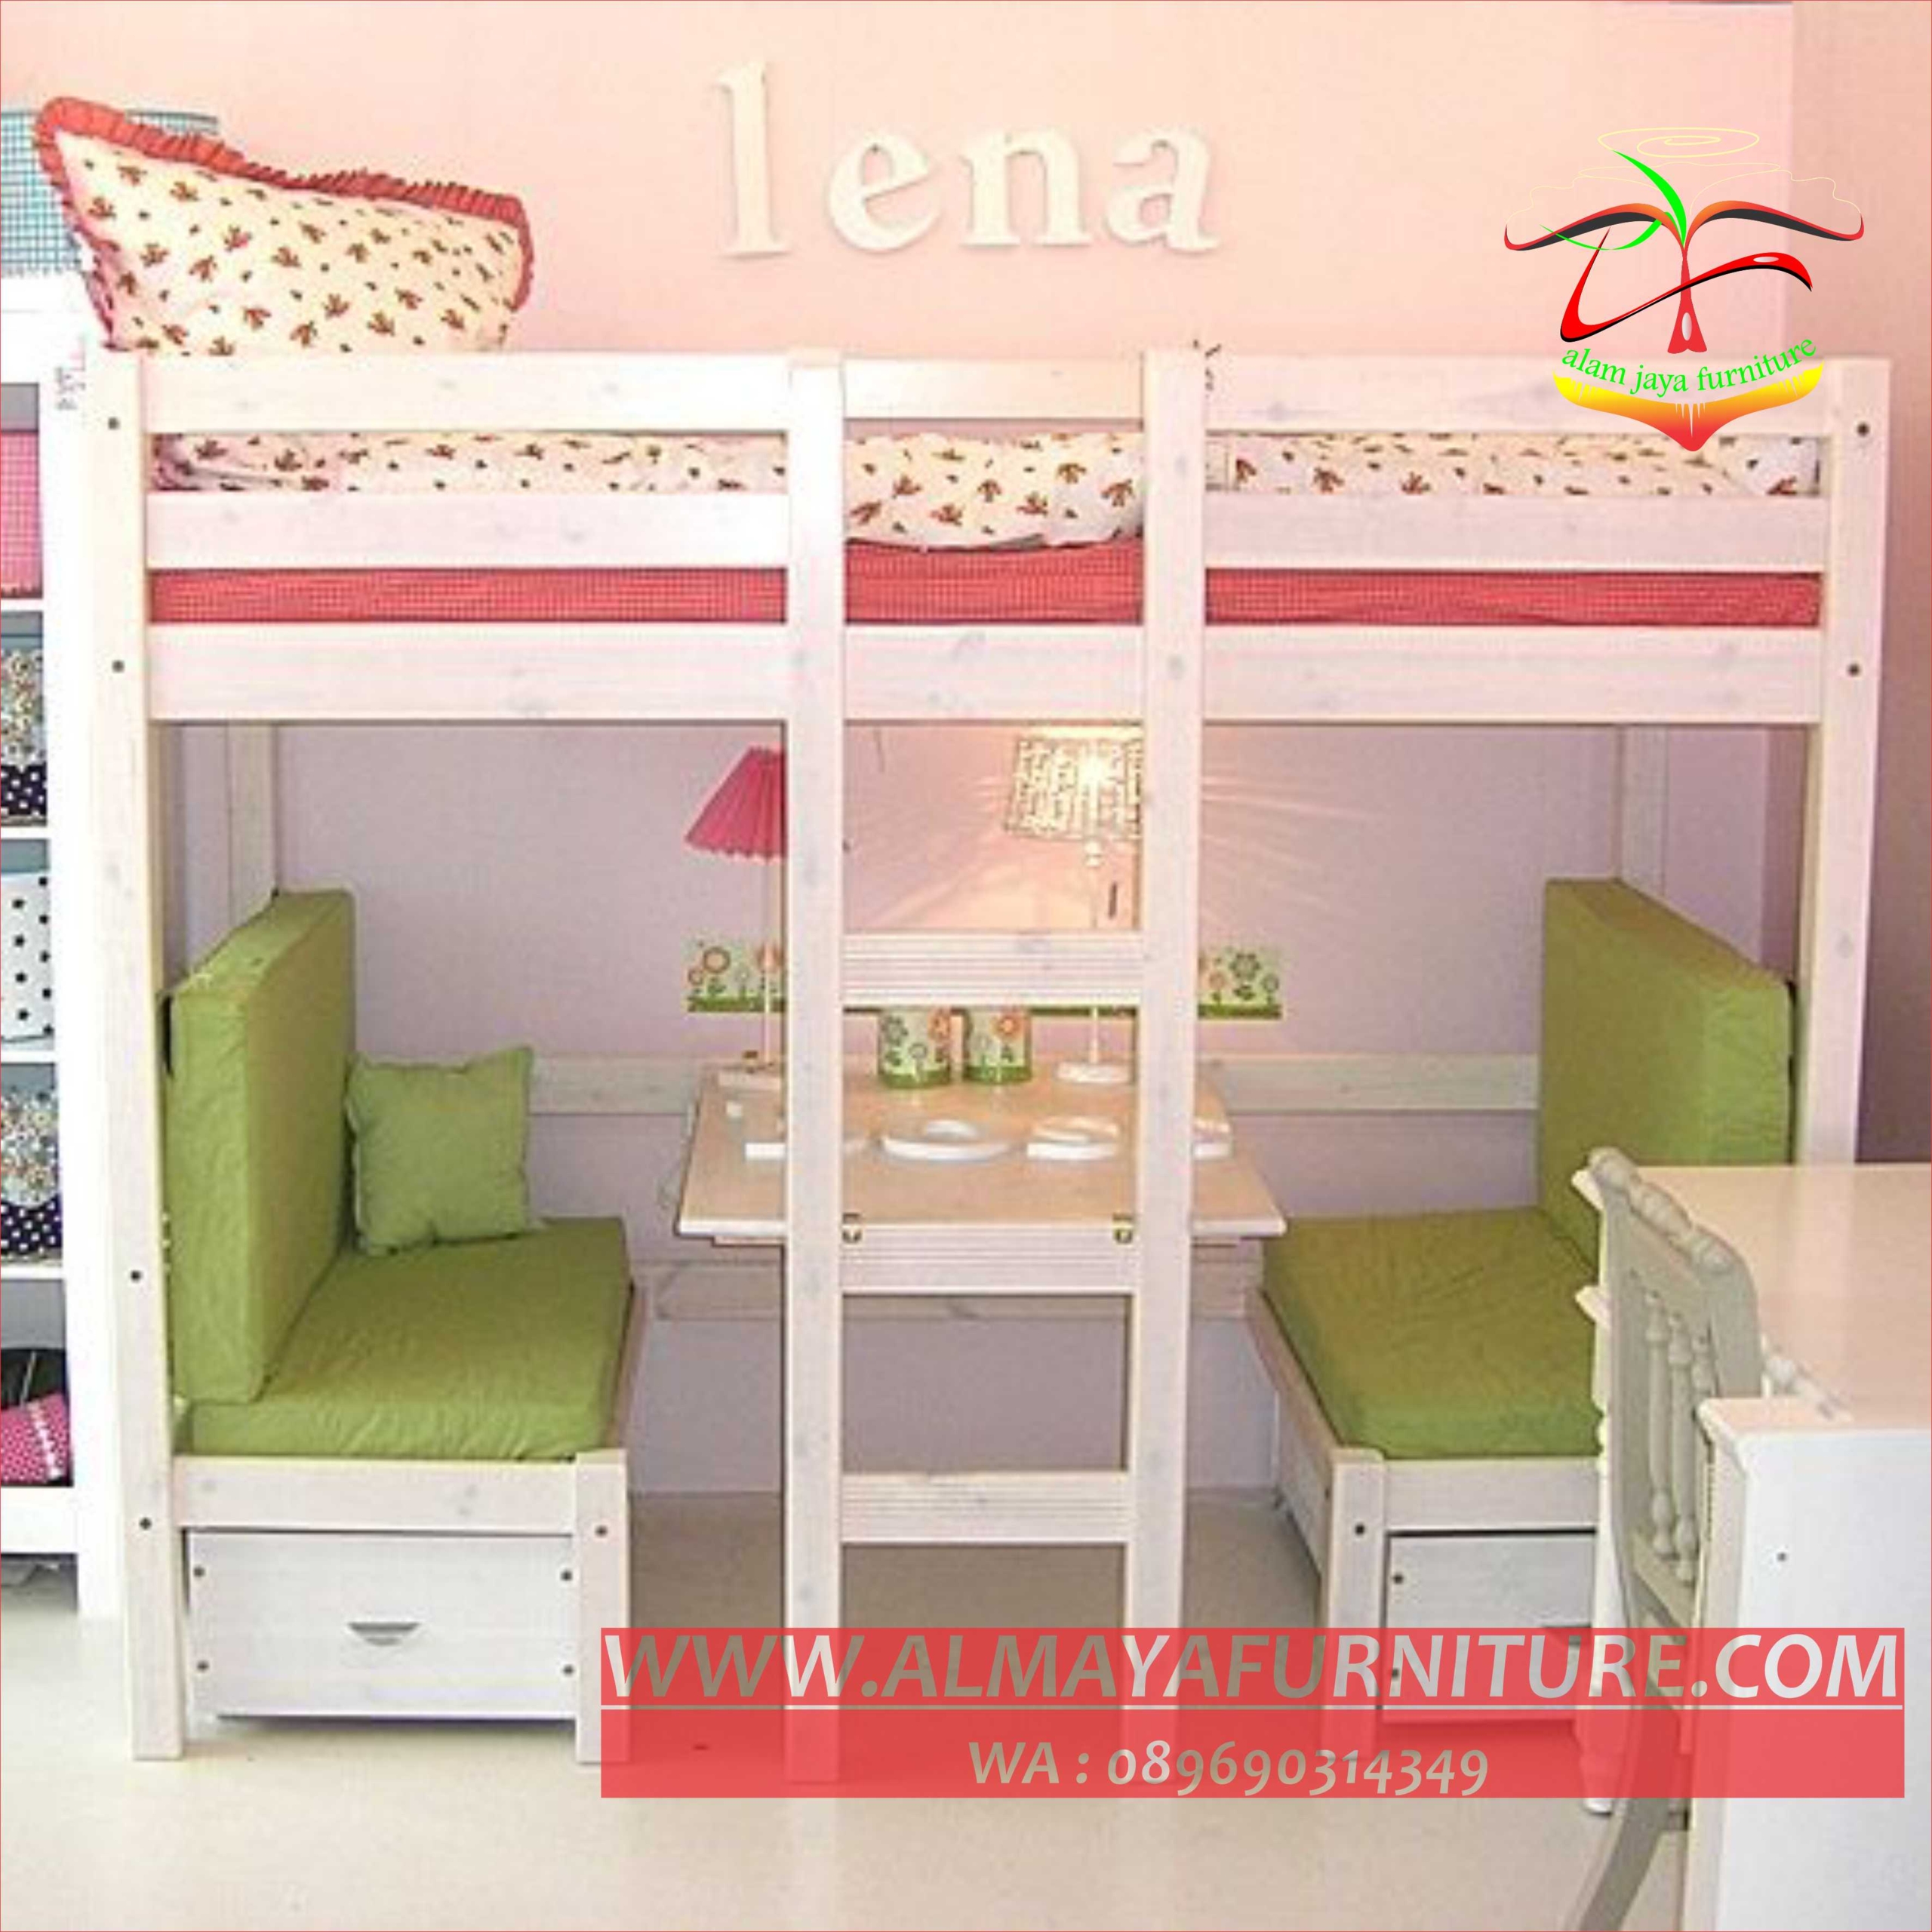 bunk bed with table and bench seats